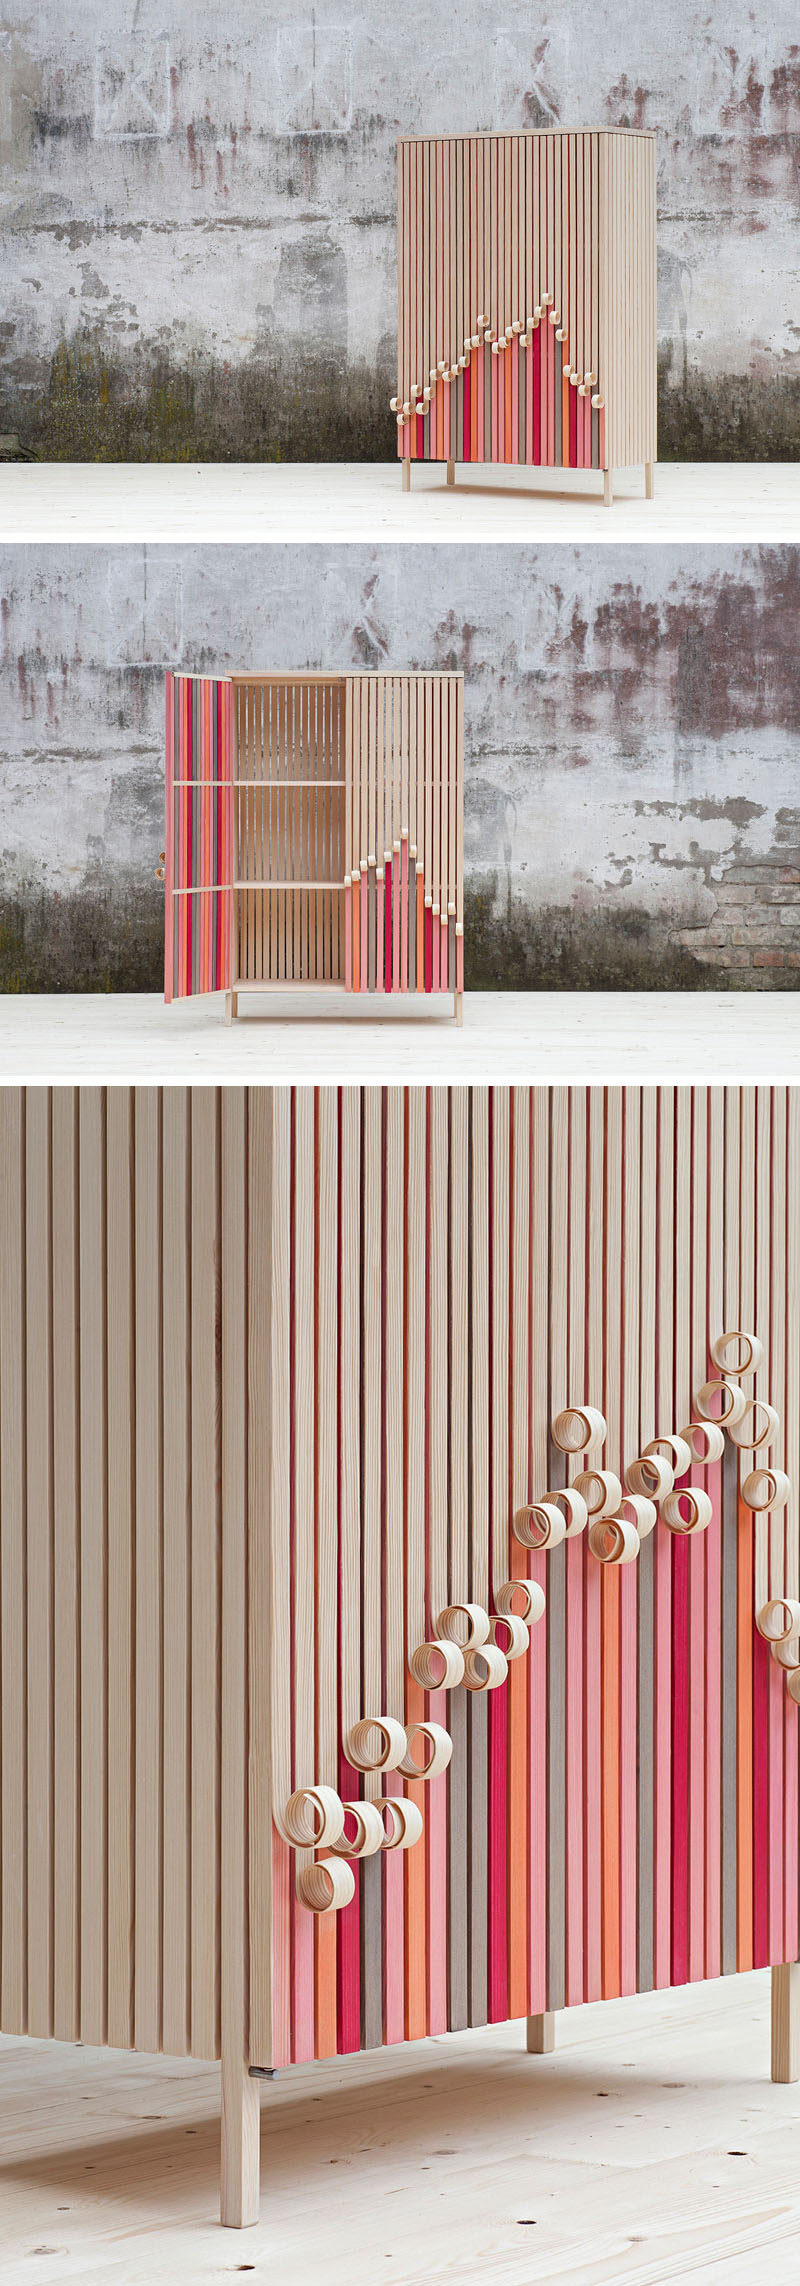 Swedish design firm Stoft Studio, have created the 'Whittle Away' collection that includes a free-standing cabinet and a wall-mounted cabinet, with wood facades that appear to peel away to reveal the colorful form underneath. #ModernFurniture #Cabinets #FurnitureDesign